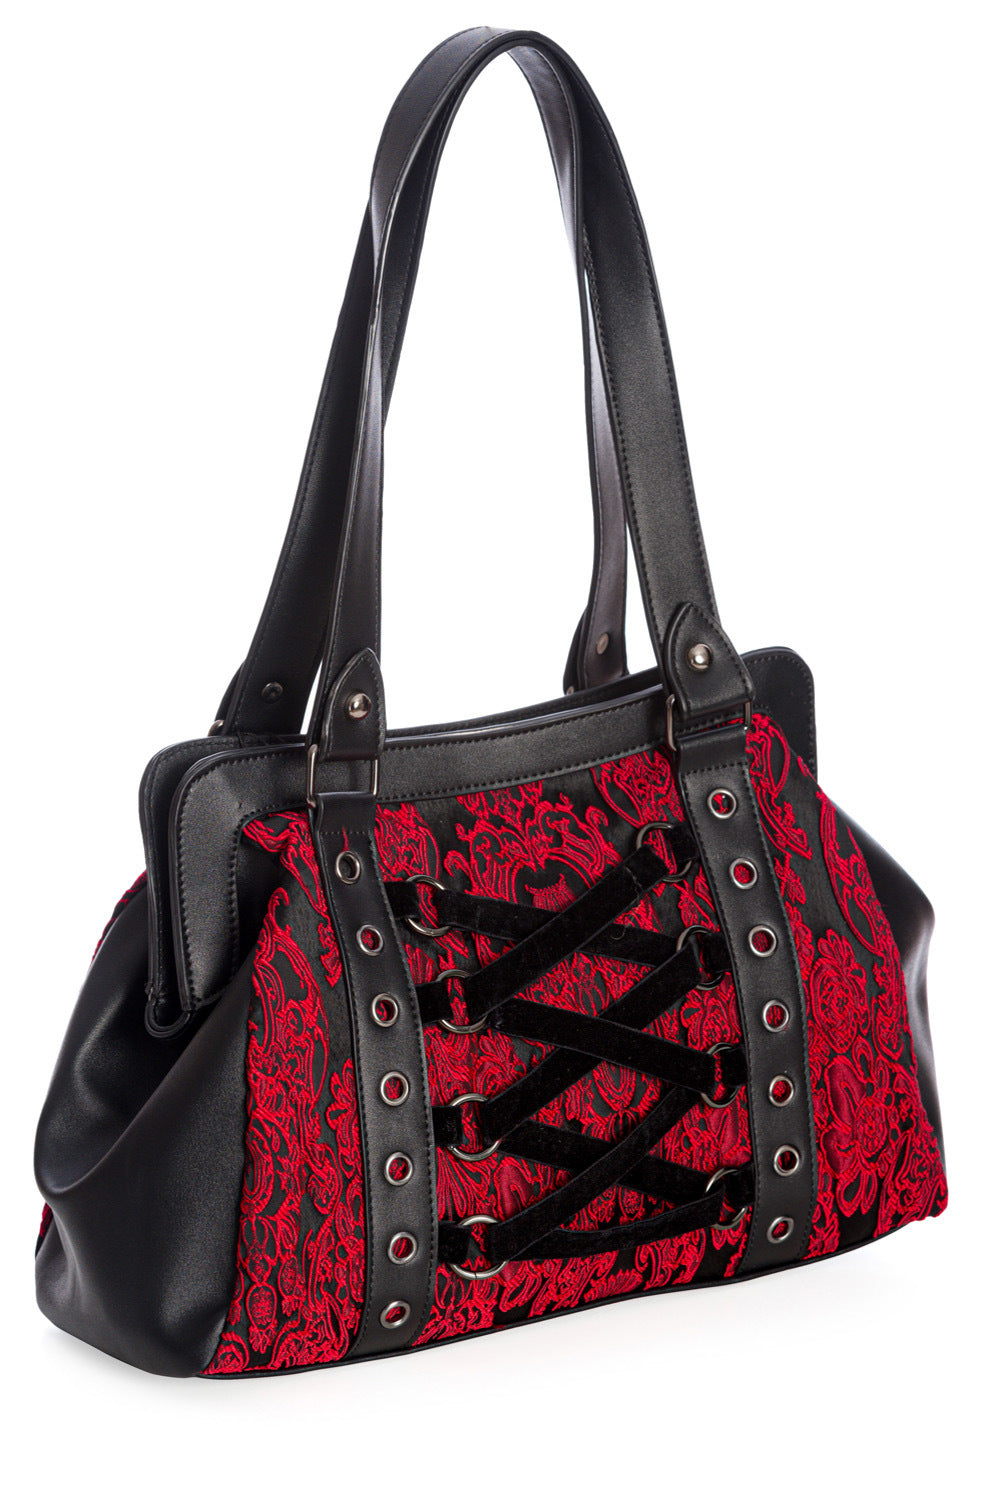 Black over the shoulder handbag in black with red lace details and corset feature to front. 